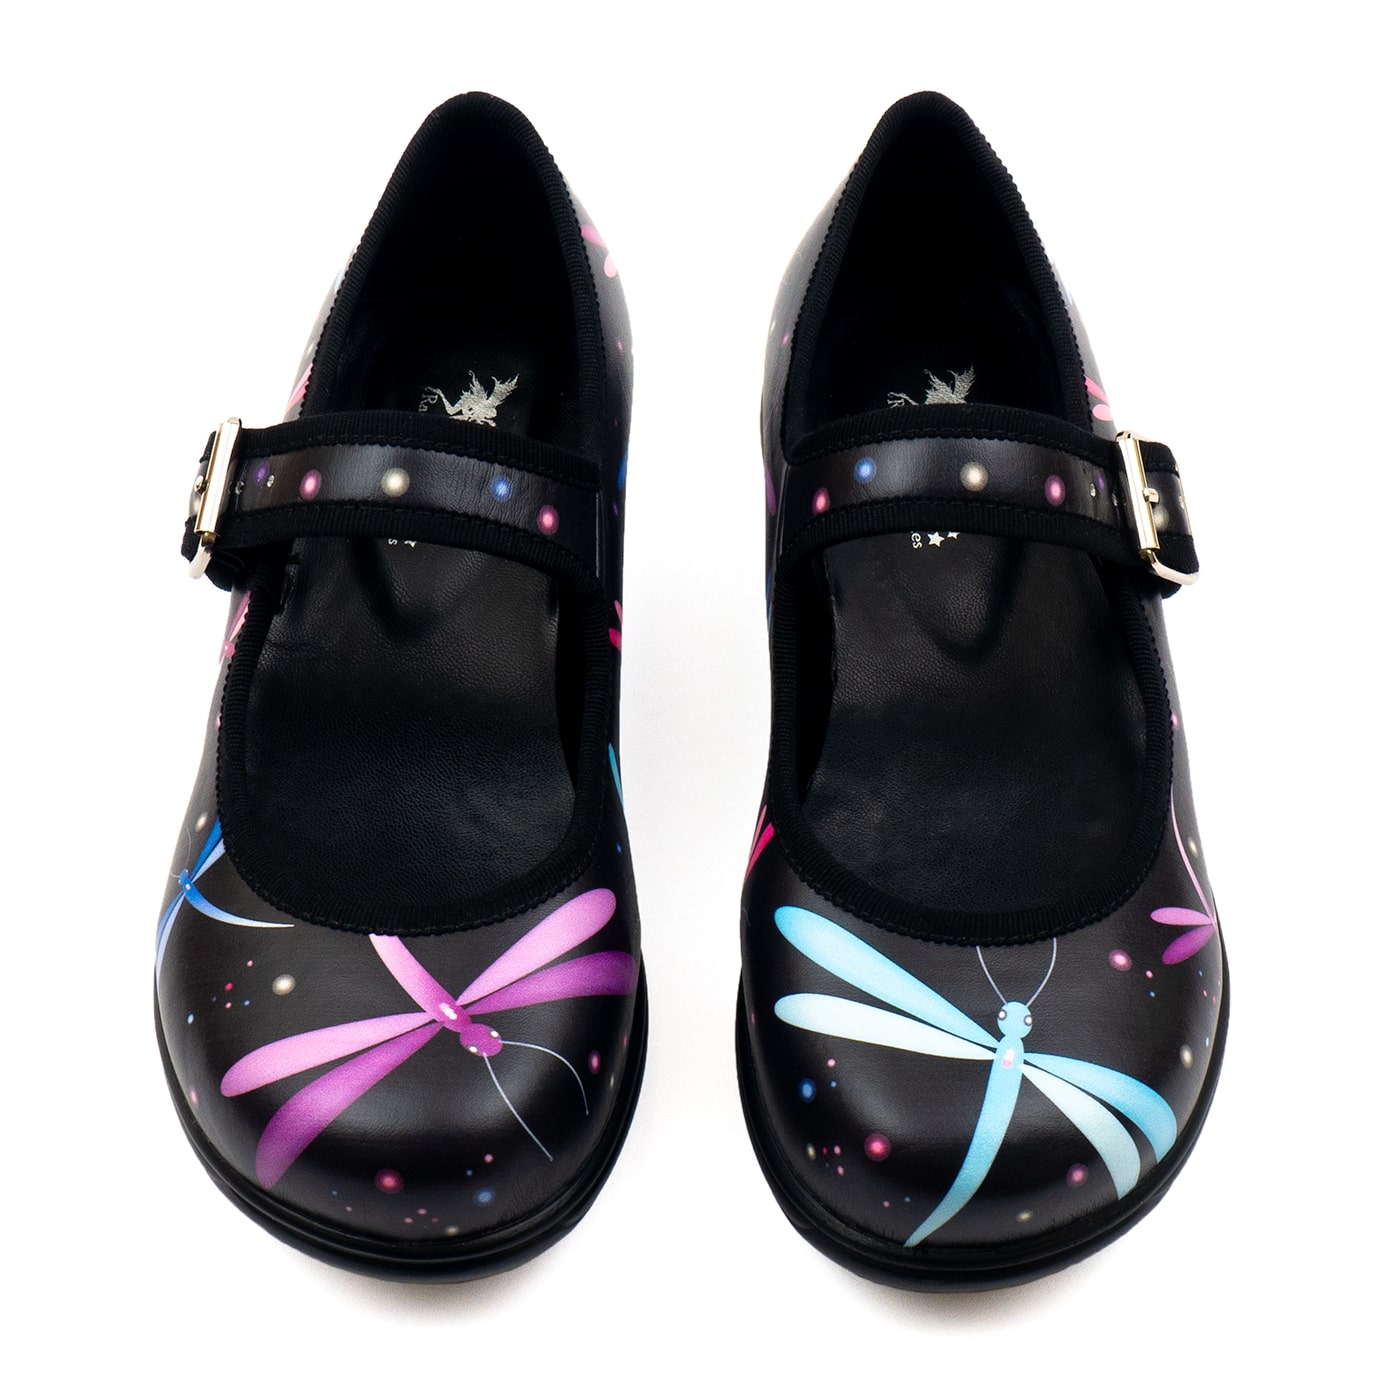 Midnight Dreaming Mary Janes by RainbowsAndFairies.com (Dragonflies - Purple - Blue - Buckle Up Shoes - Mismatched Shoes) - SKU: FW_MARYJ_DREAM_MID - Pic 02